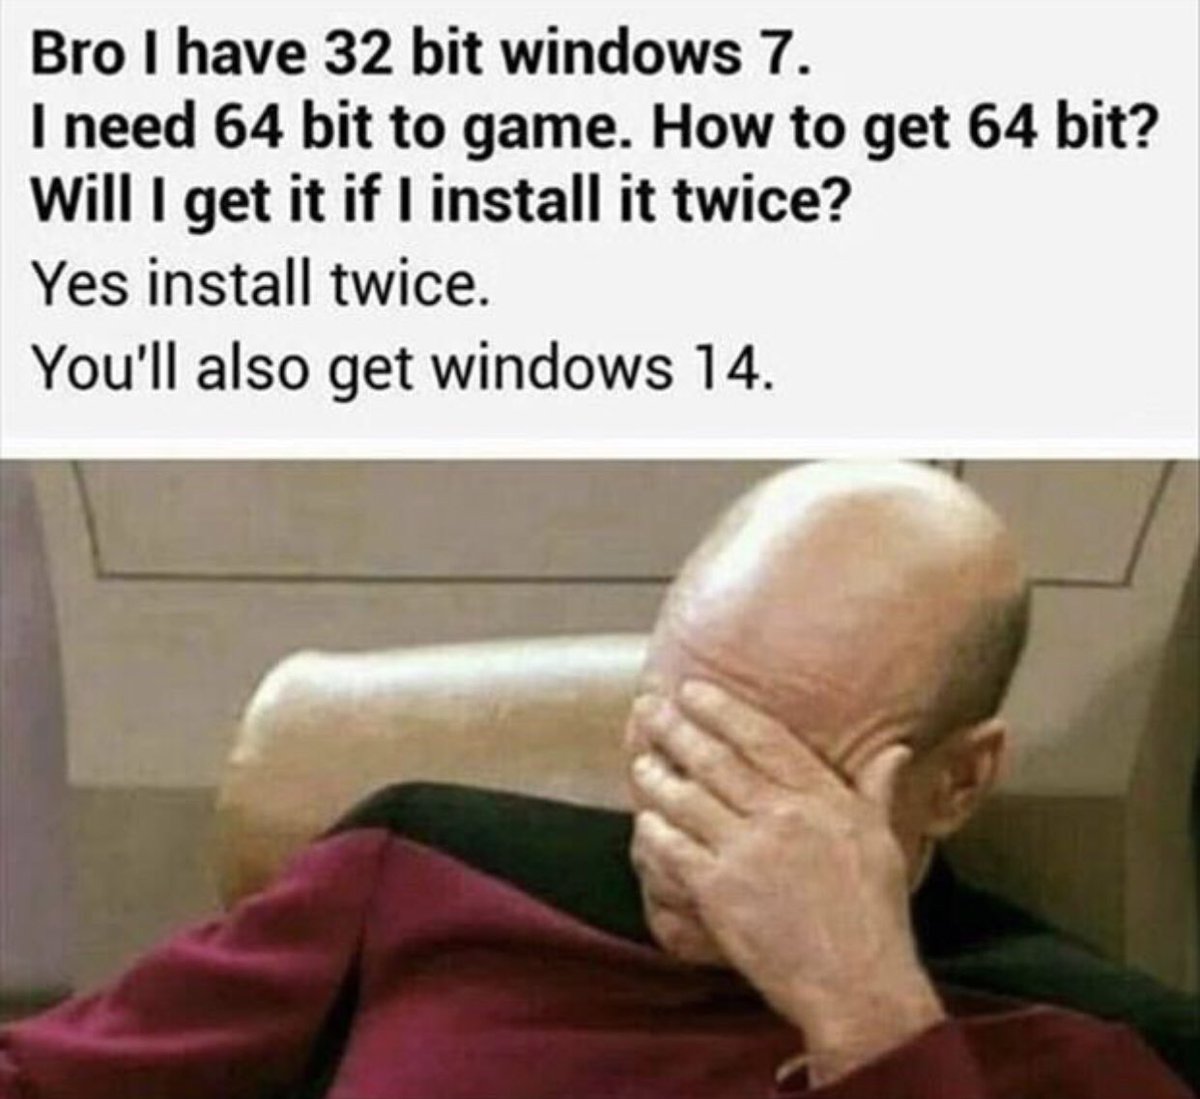 @brunoborges People can always try installing windows twice if they’re stuck on 32 bit 😂